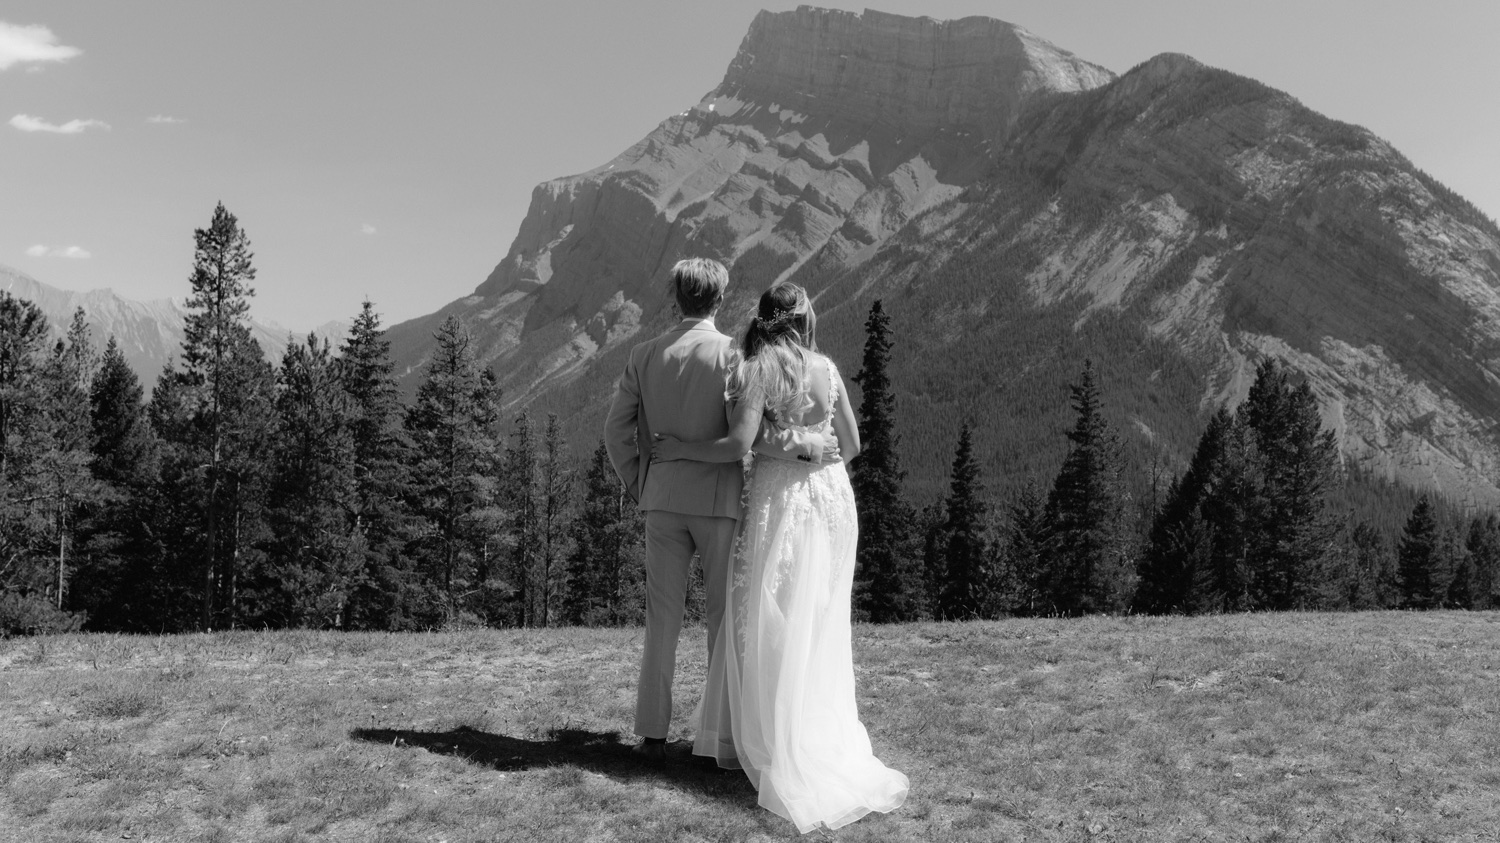 Couple embracing after their ceremony and reception at Tunnel Mountain Reservoir overlooking Mount Rundle